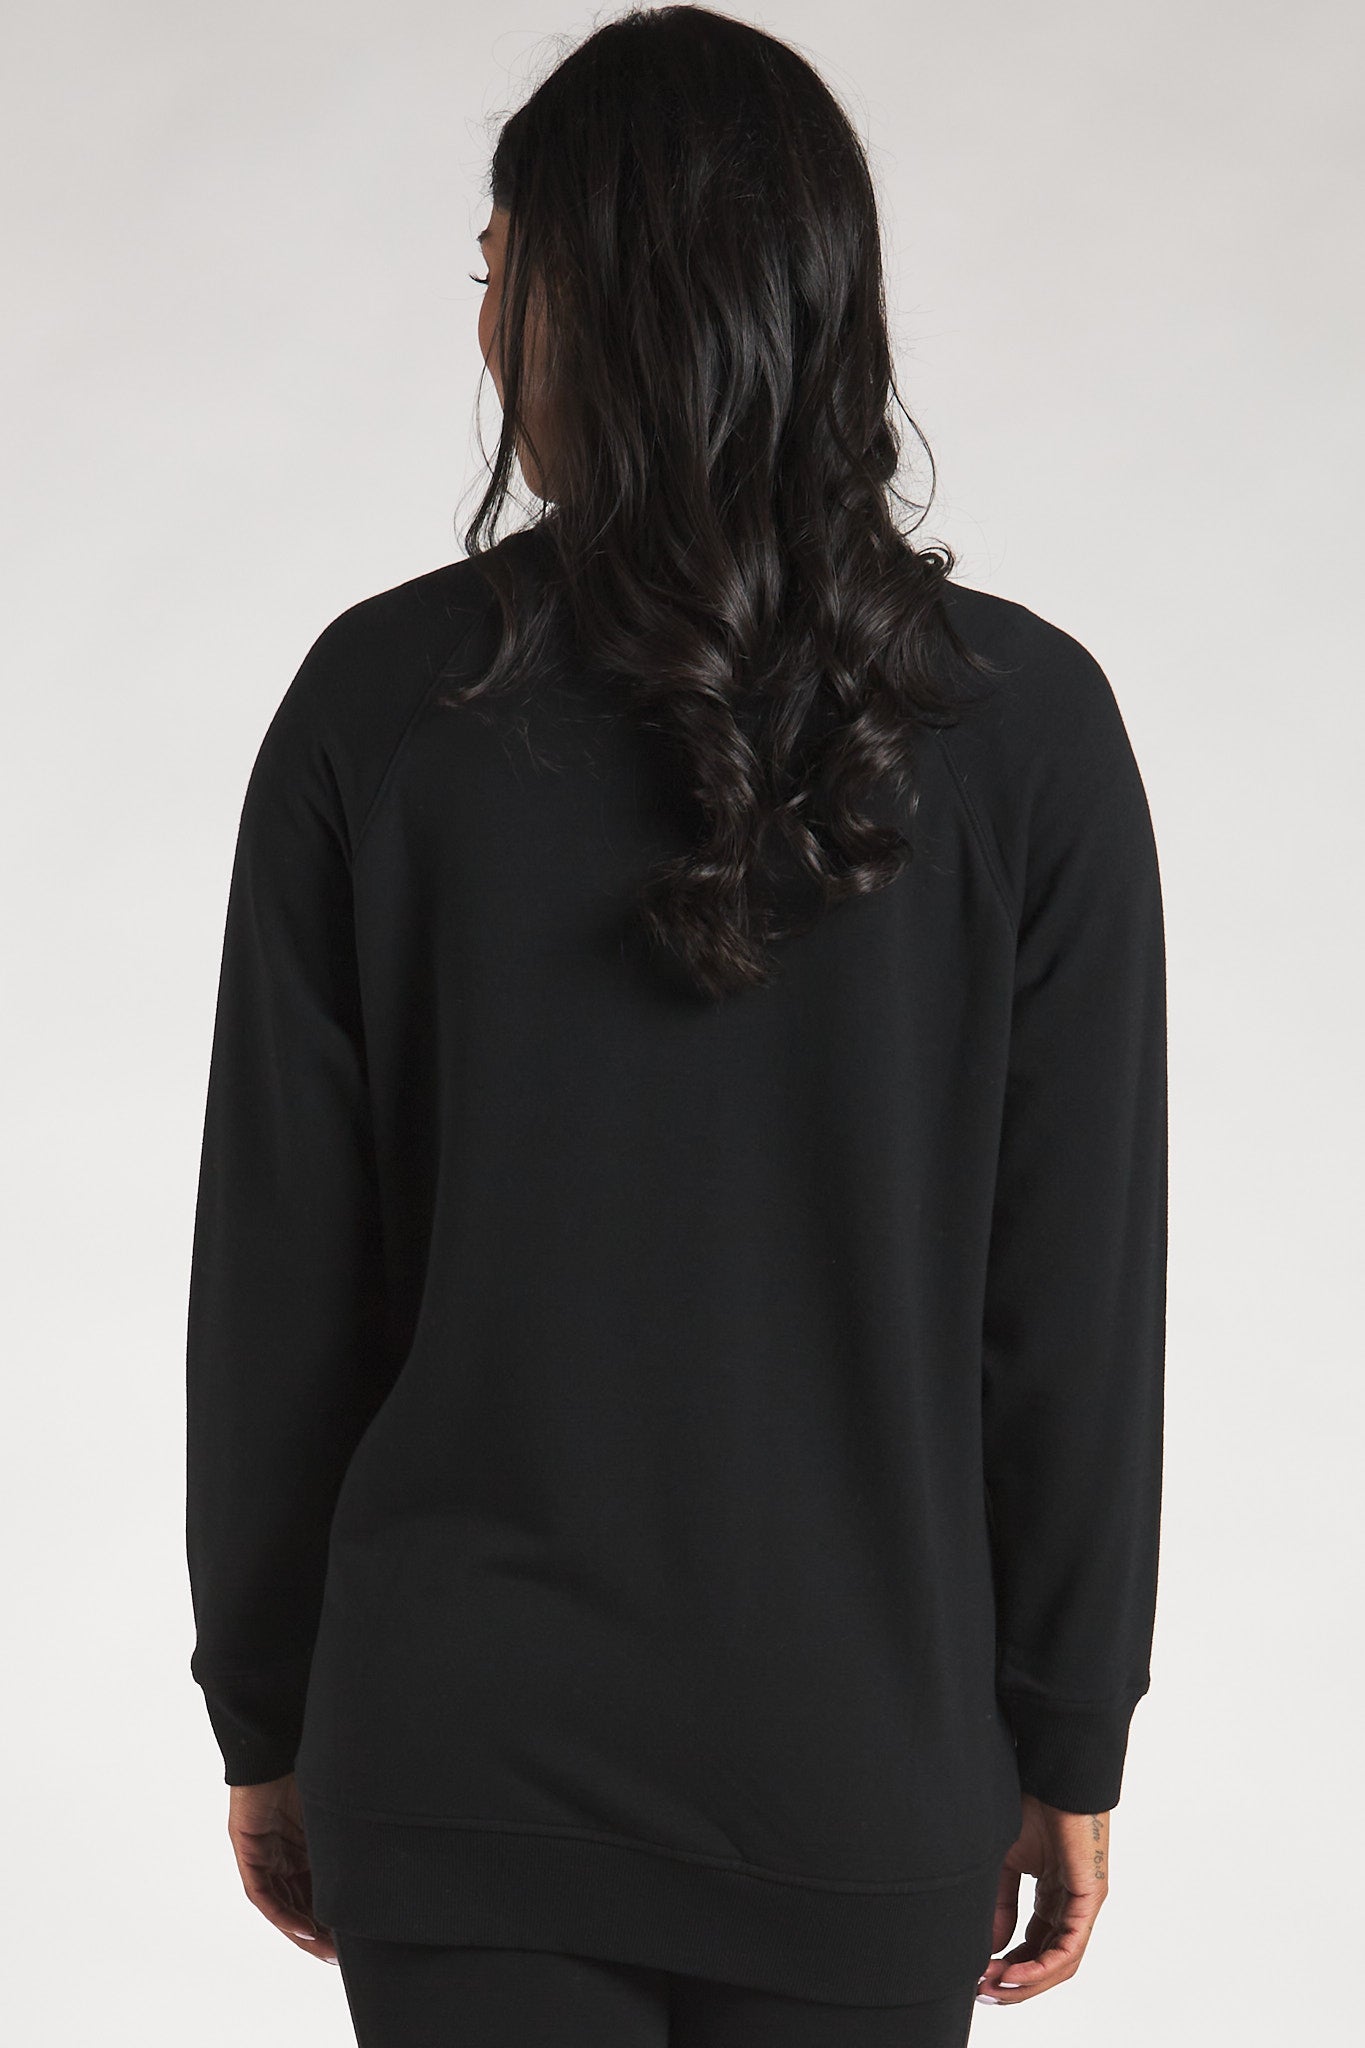 Back view of the Terrera bamboo fleece button-up cardigan in Black.